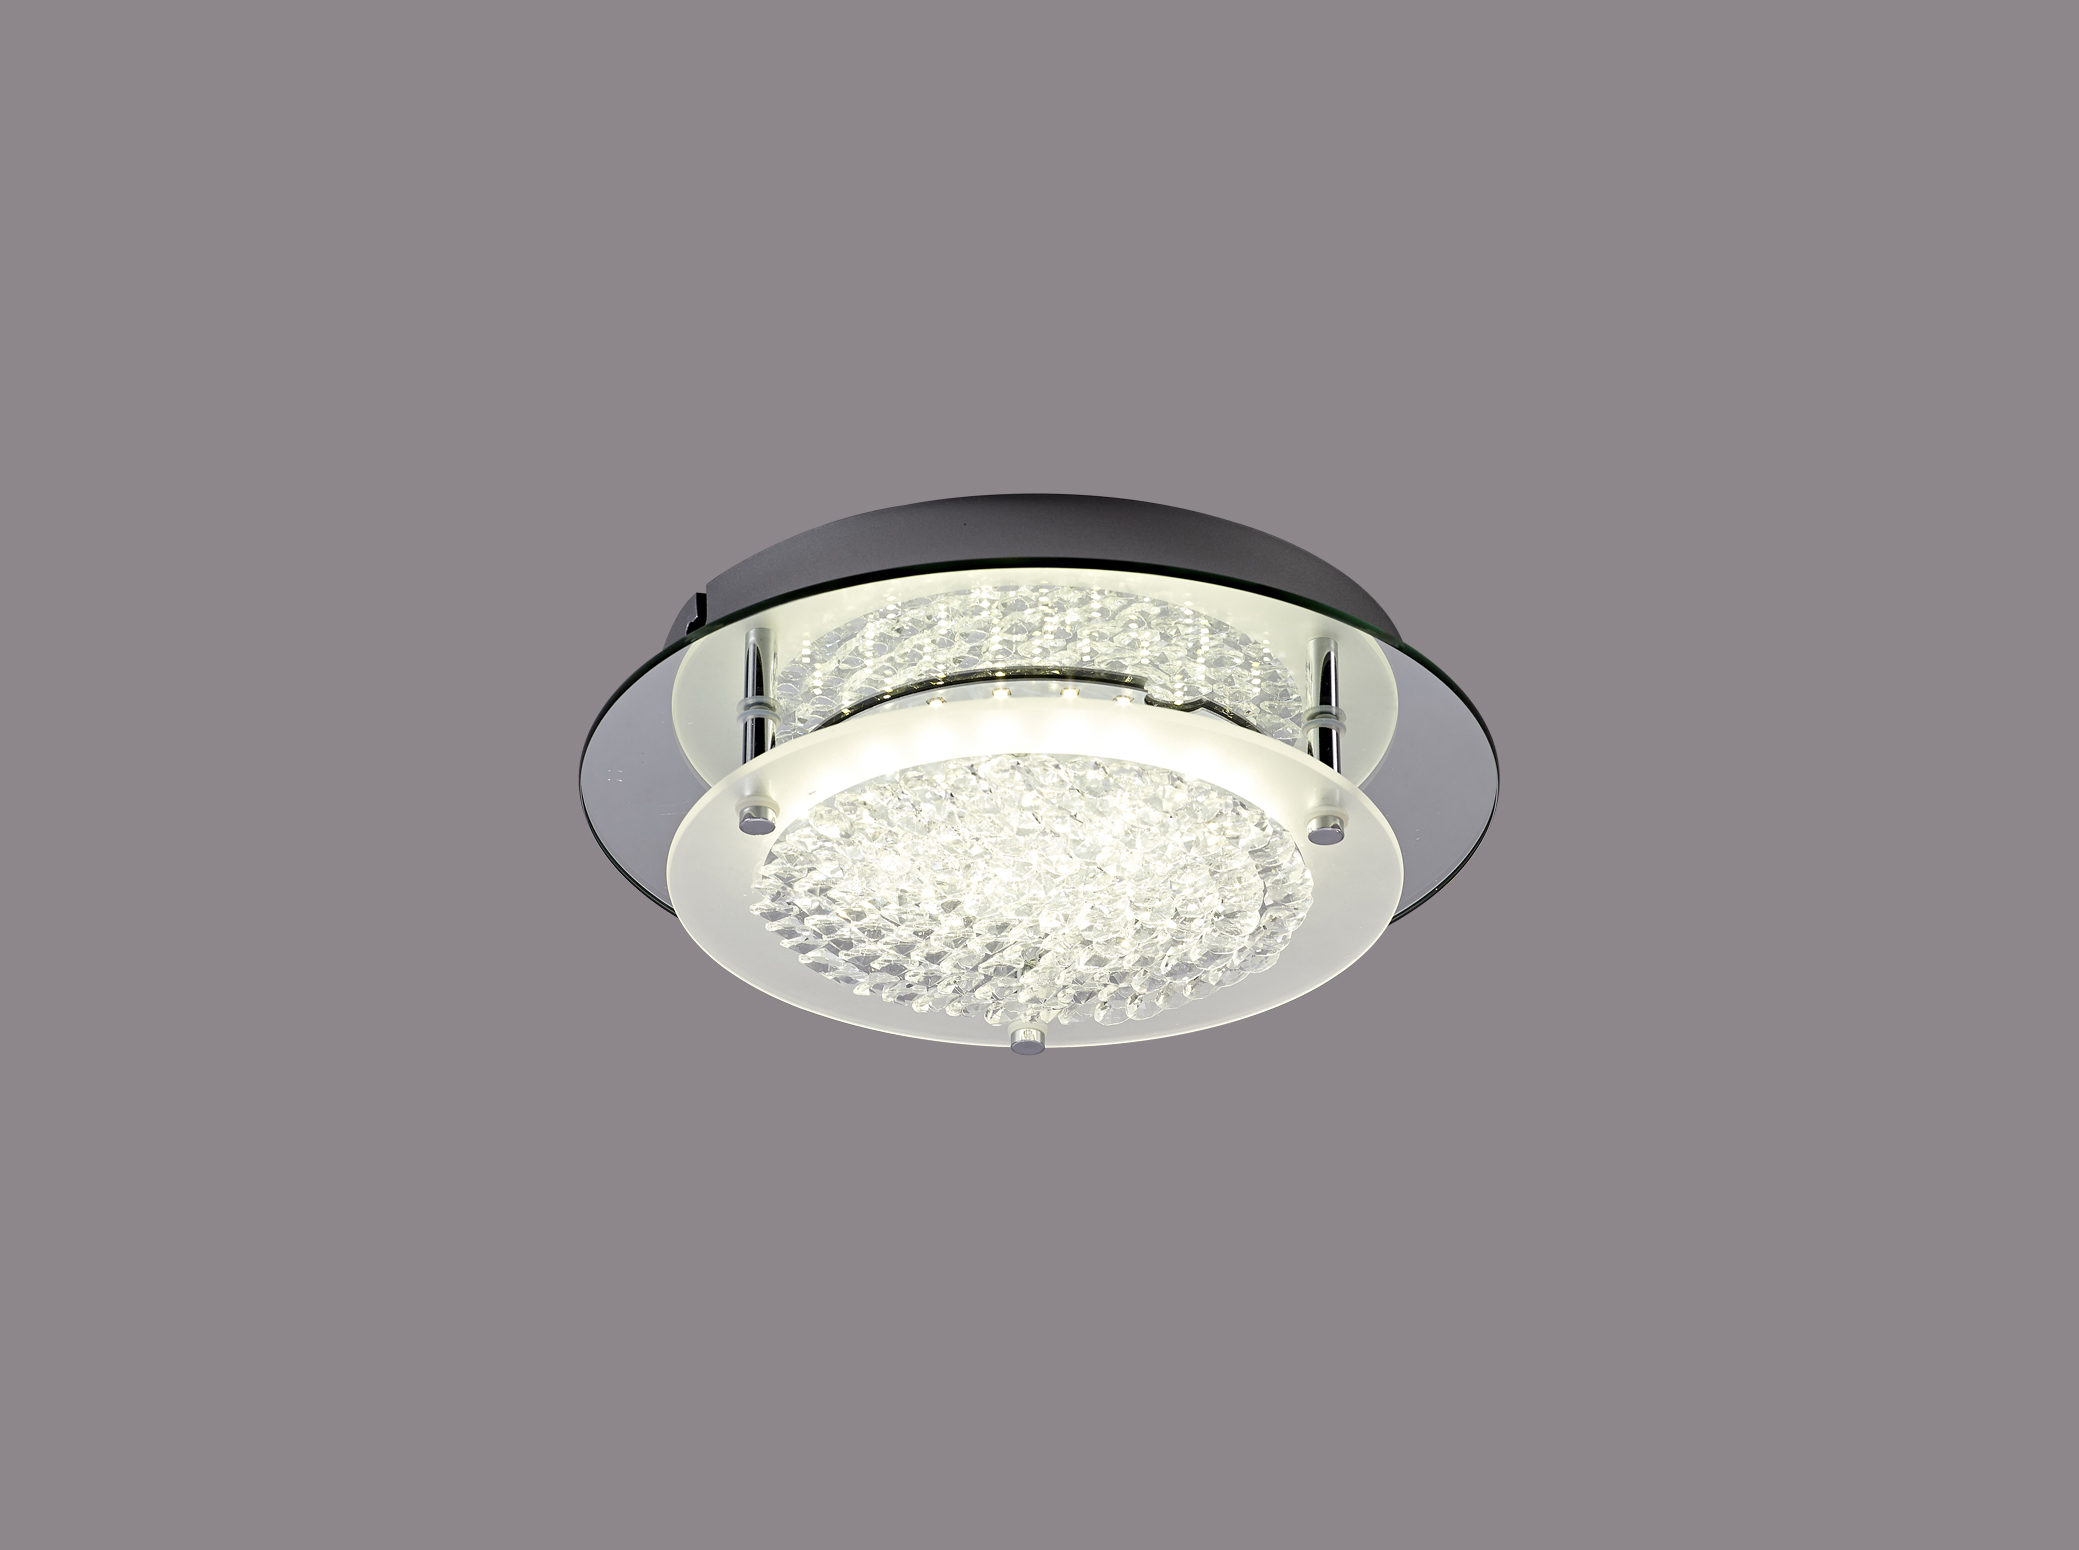 Gino Crystal Ceiling Lights Deco Flush Crystal Fittings